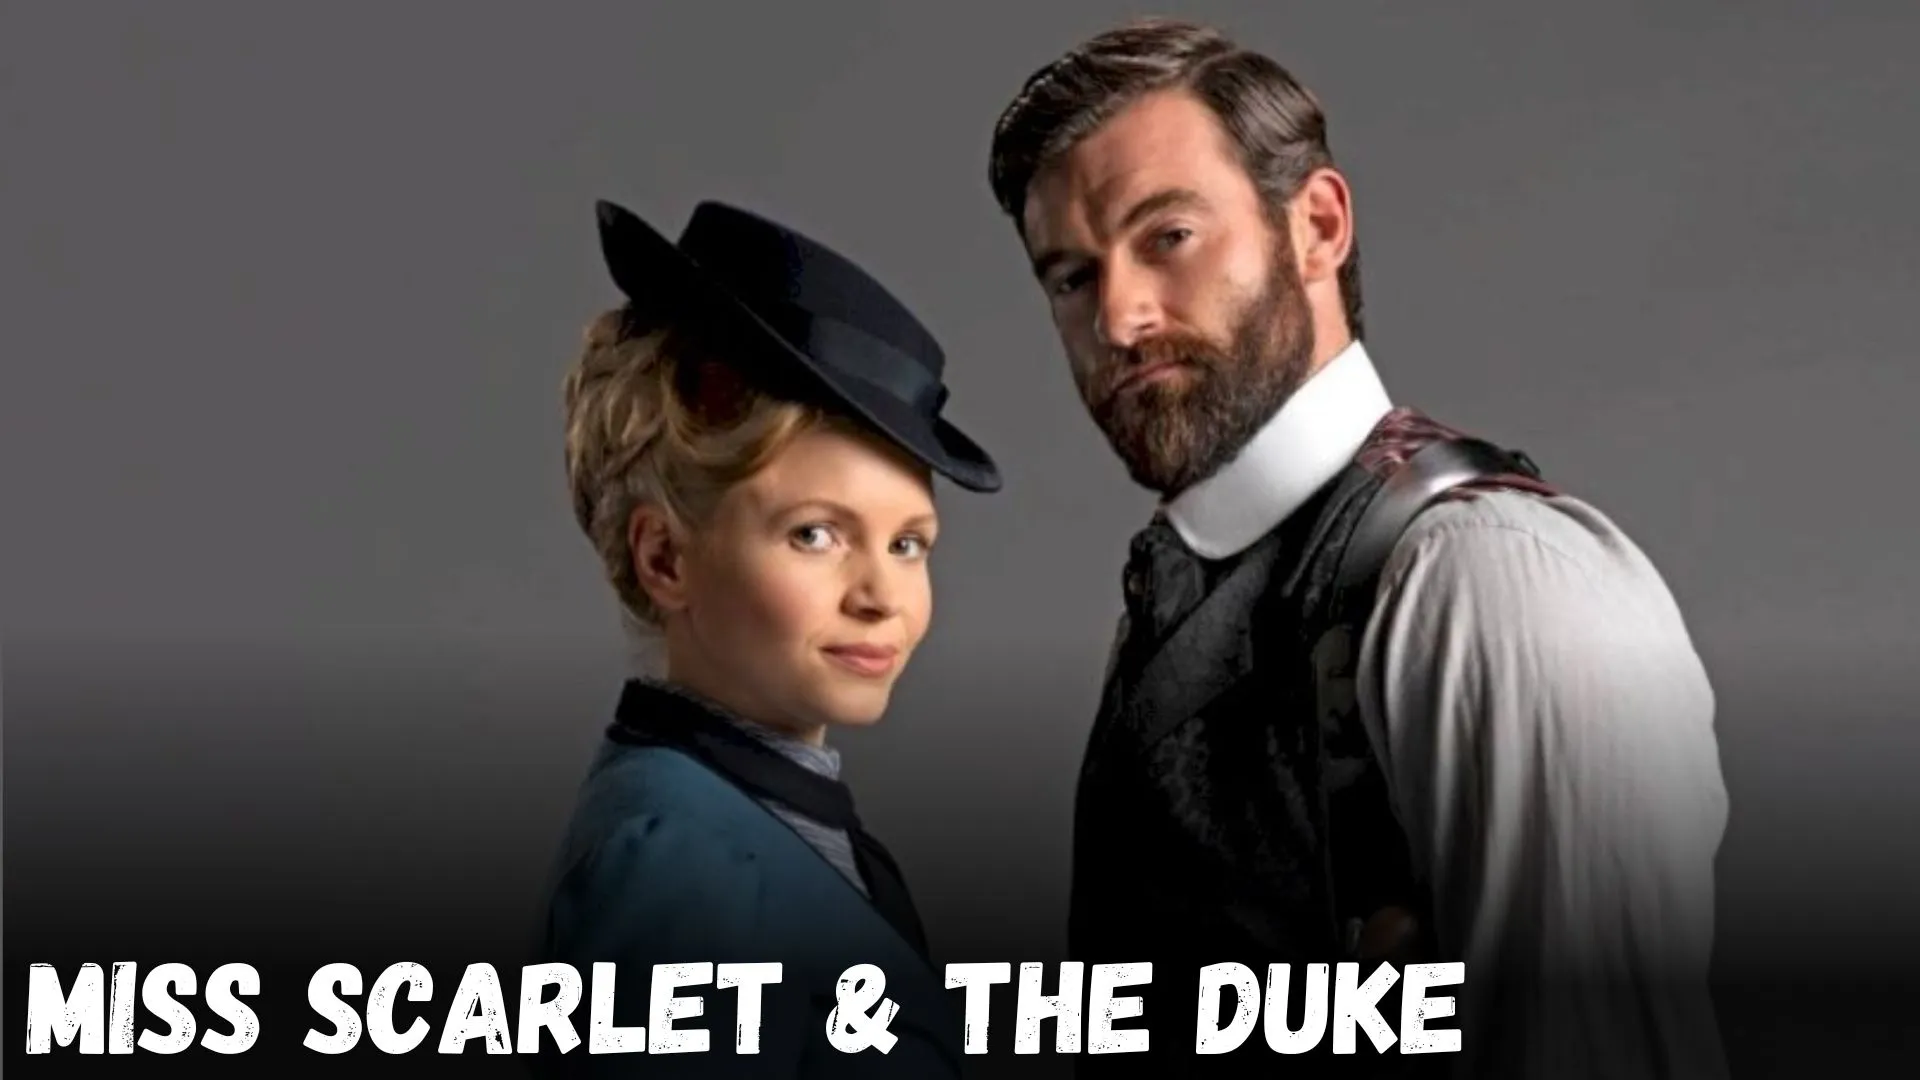 Miss Scarlet & the Duke Parents Guide